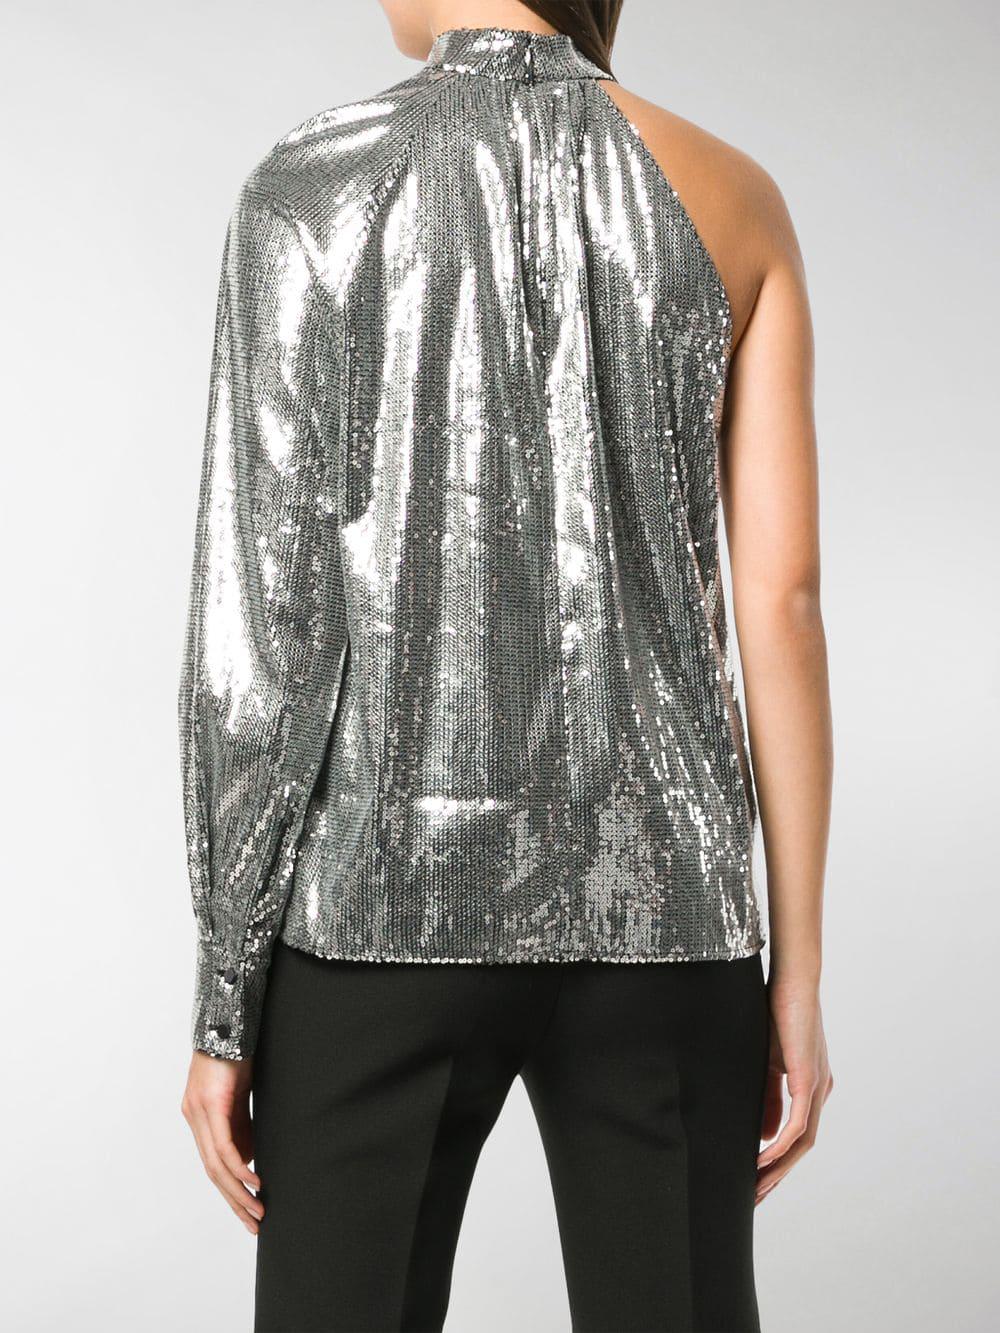 MSGM One Sleeve Sequin Top in Silver (Metallic) - Lyst